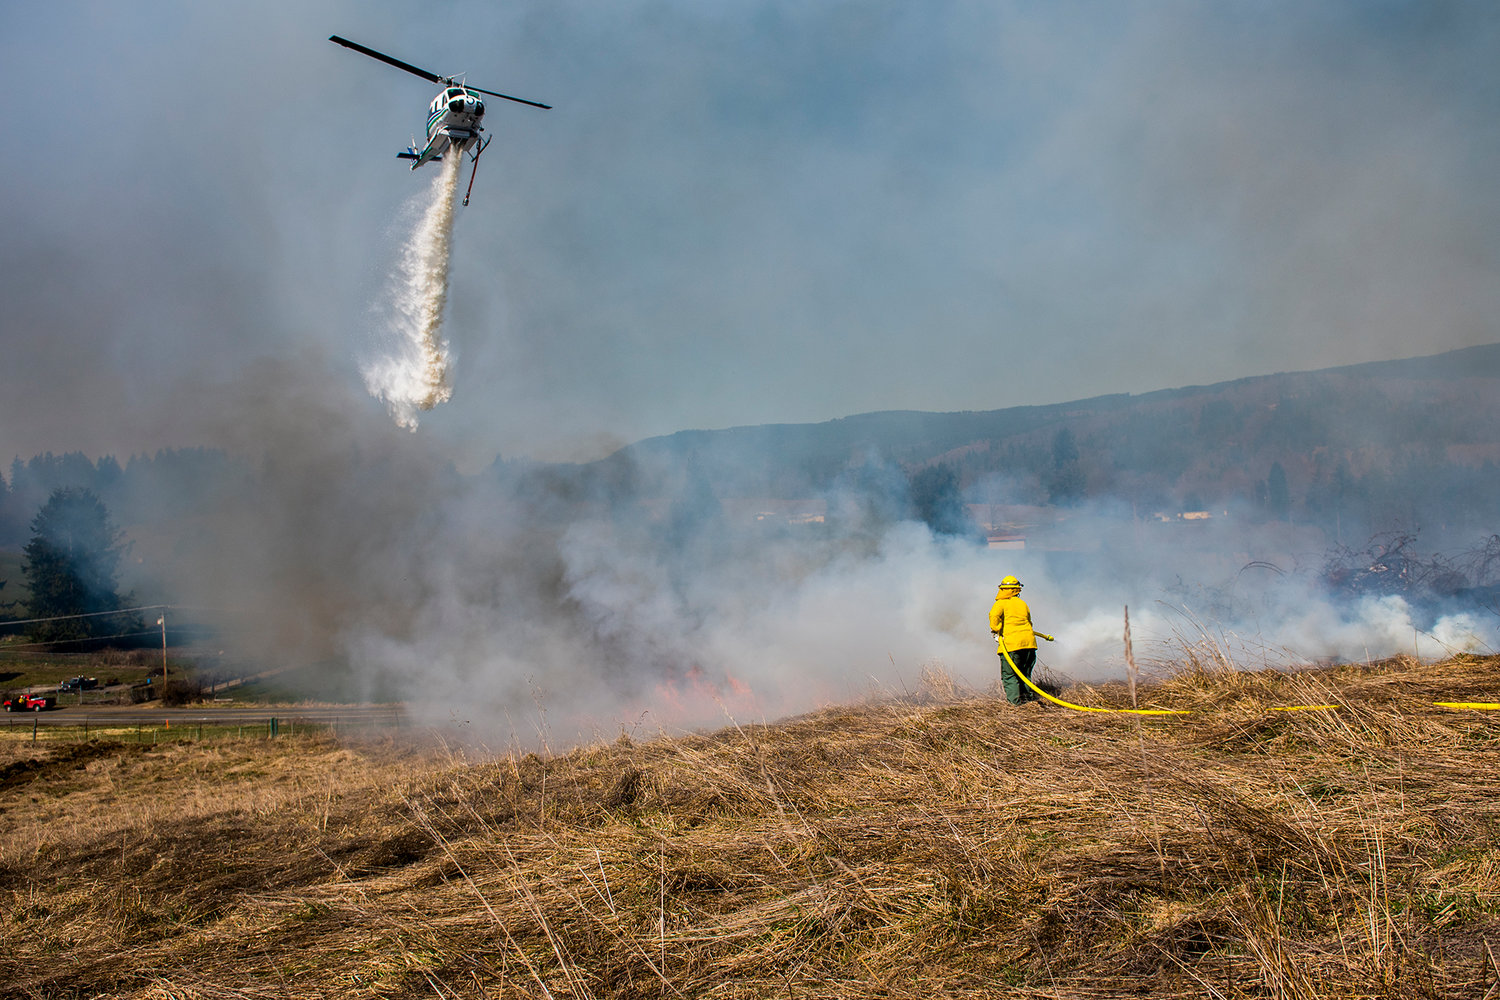 FILE PHOT0 — A helicopter used by the Wildfire Aviation Division of the Department of Natural Resources drops water from the sky onto a hillside while a DNR firefighter uses a hose to extinguish flames in Mossyrock in March of 2019.